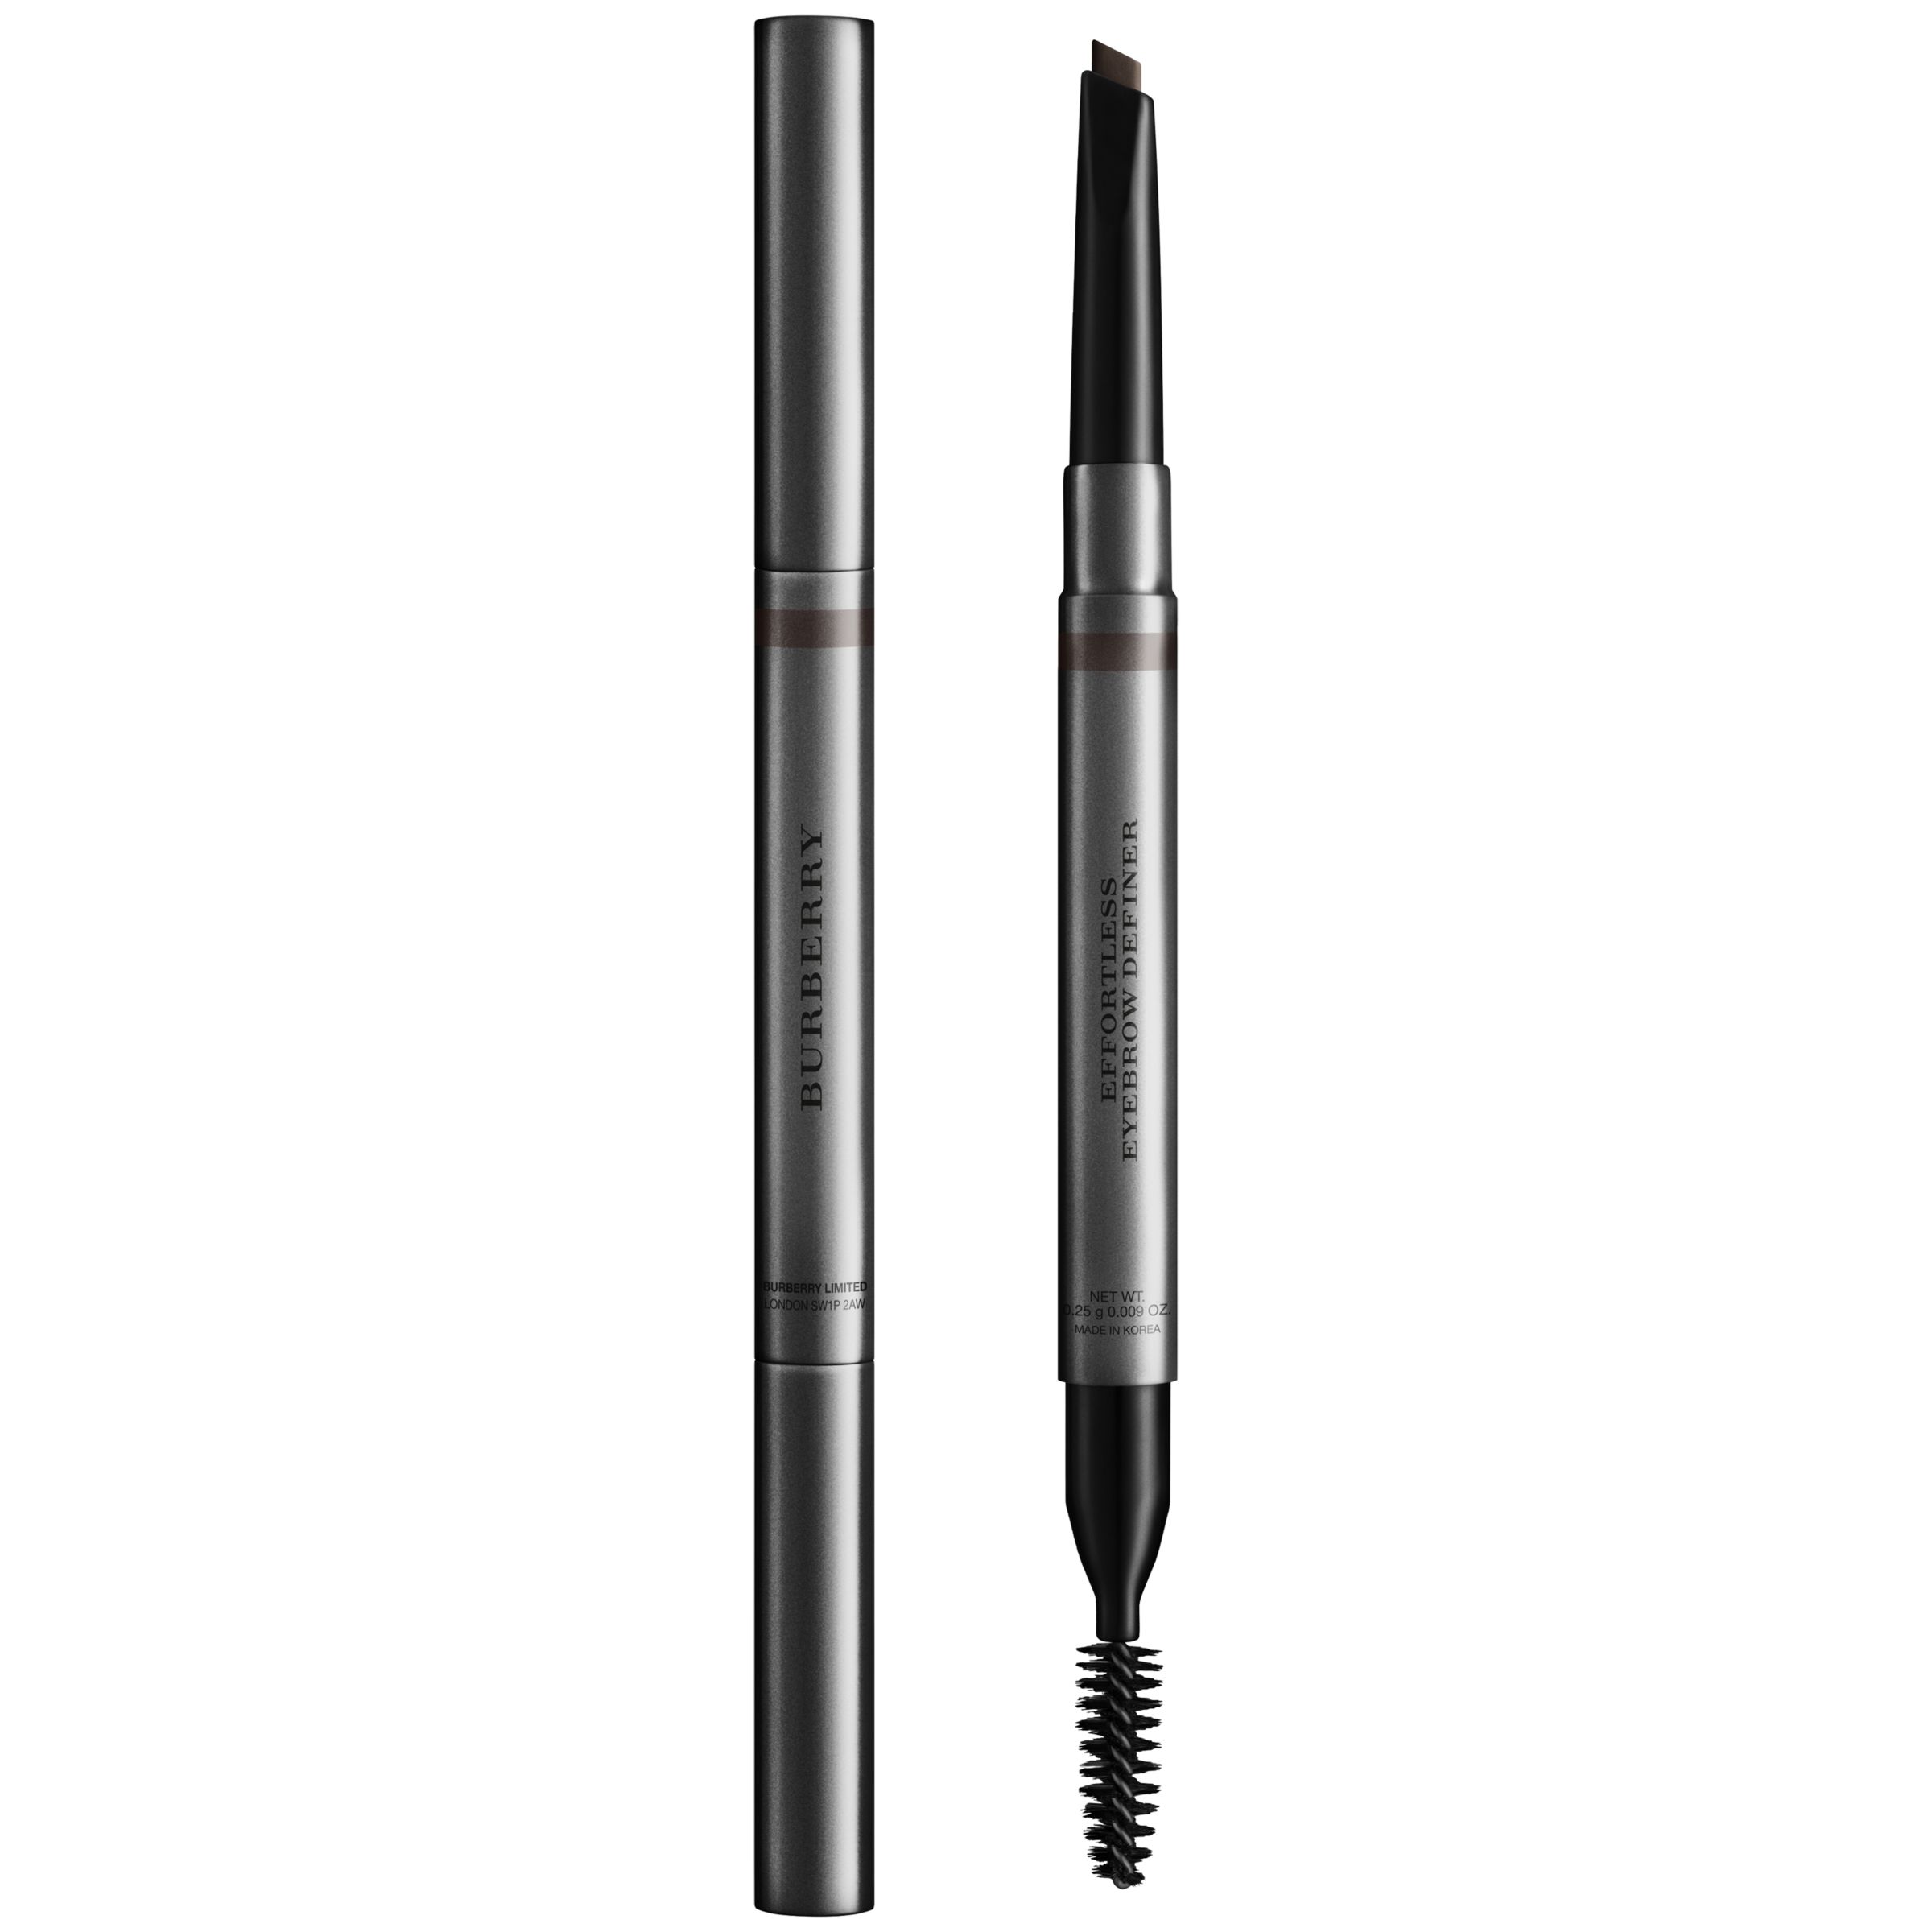 shop for Burberry Beauty Effortless Brow Definer at Shopo